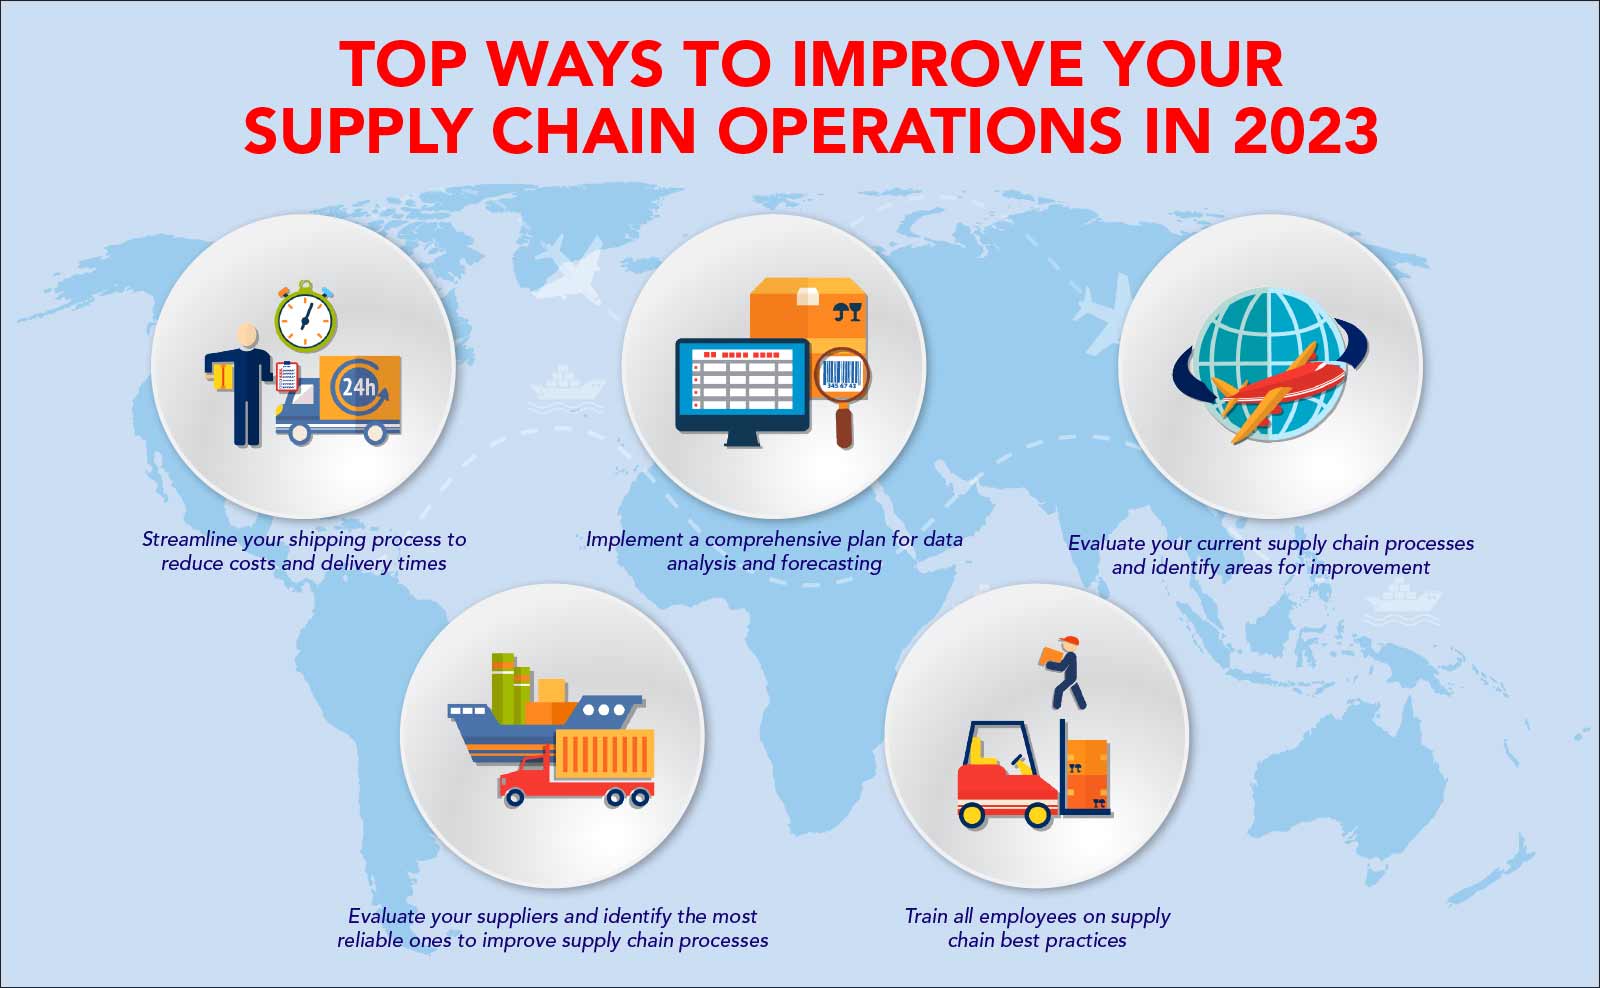 Top Ways to Improve Your Supply Chain Operations in 2023